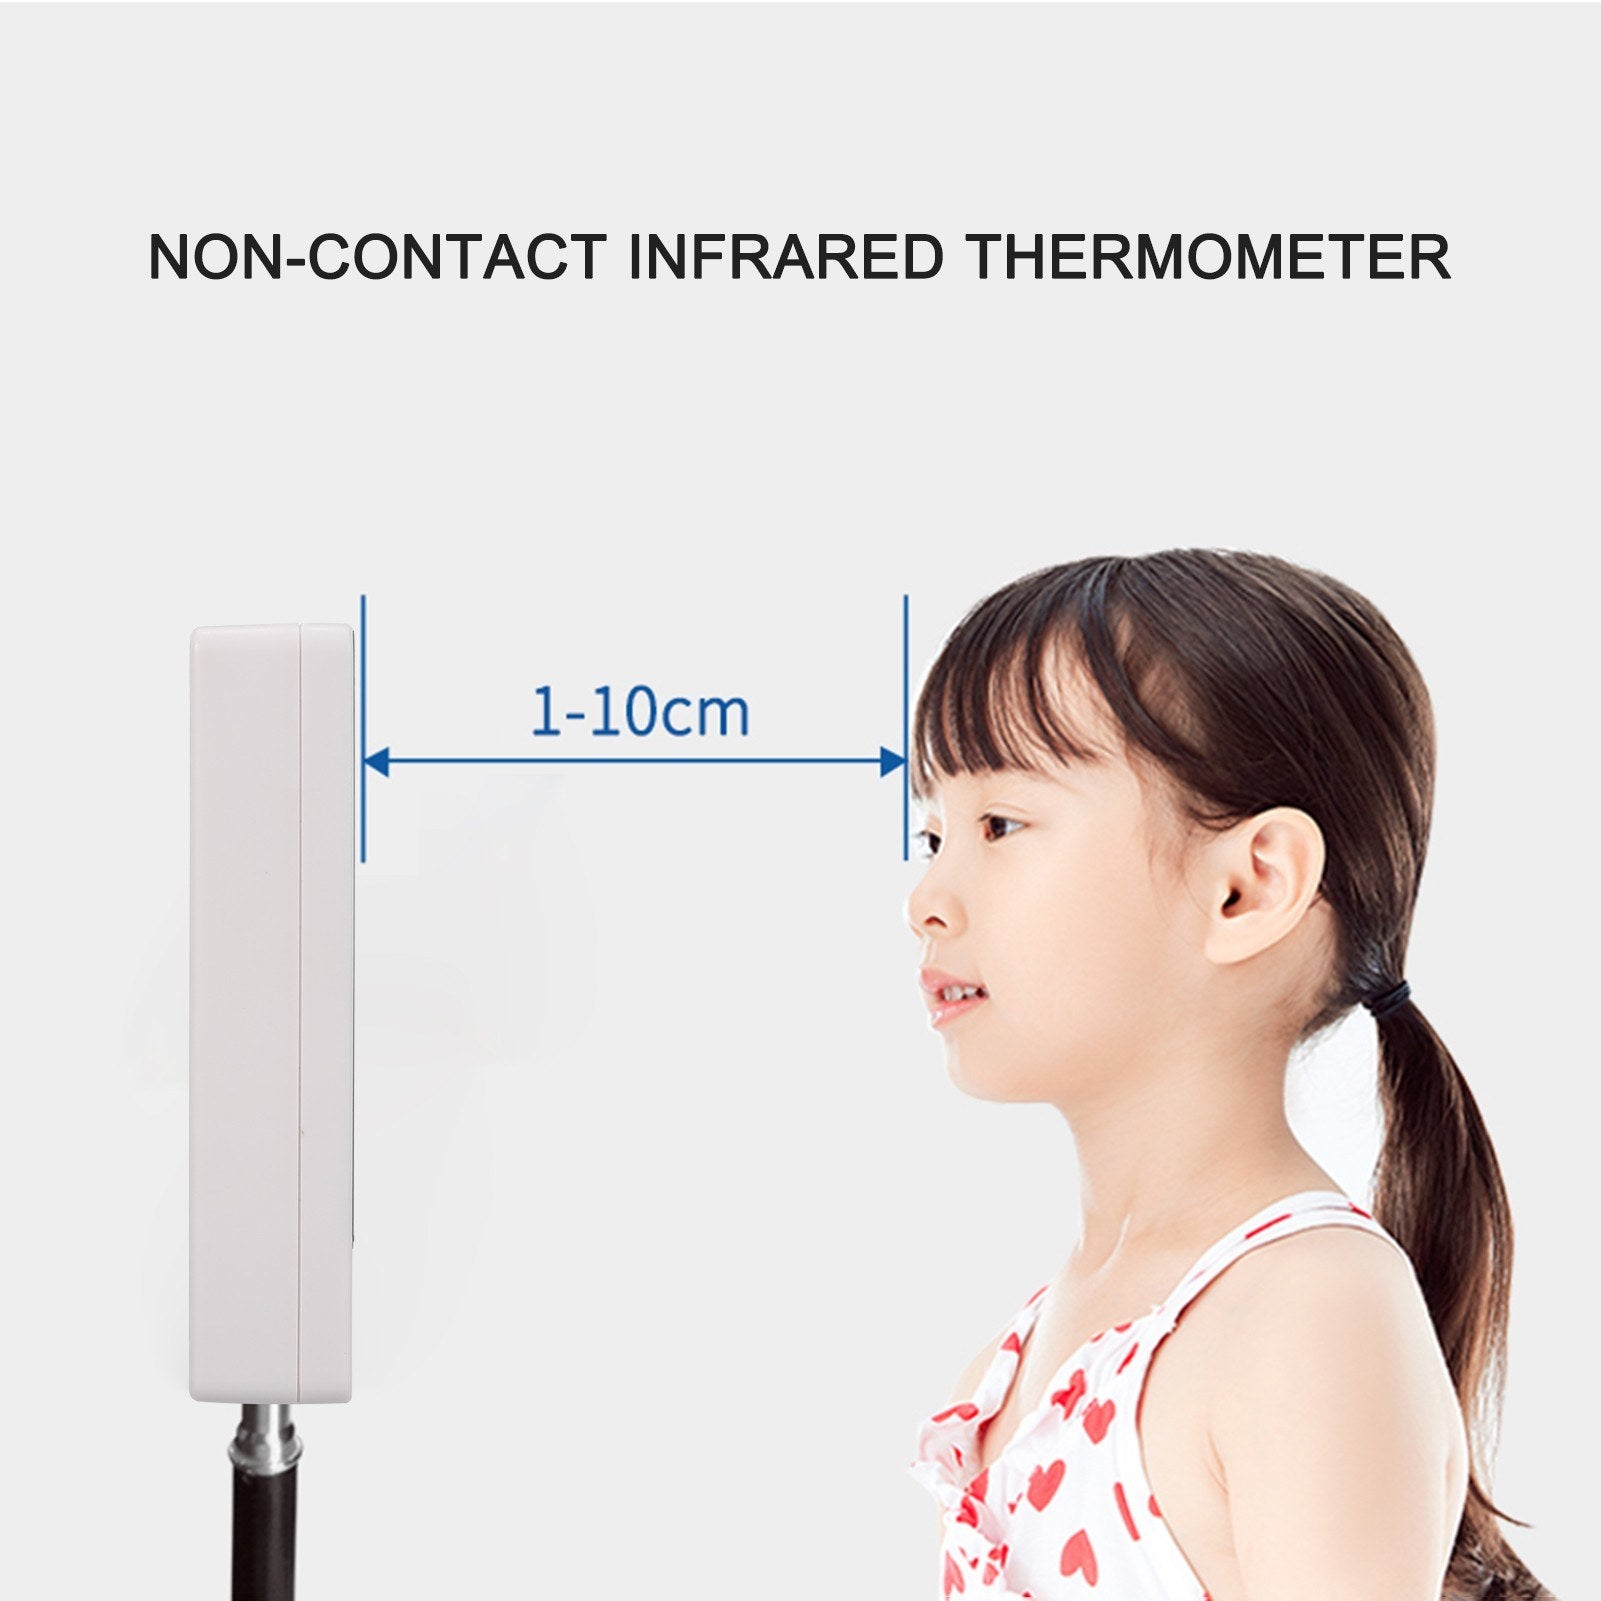 Auto Intelligent Non-contact Infrared Thermometer Forehead Thermometer 1-10cm Temperature Measuring °C / °F Unit Switch Fever Alarm for Office Factories School Shops Restaurants